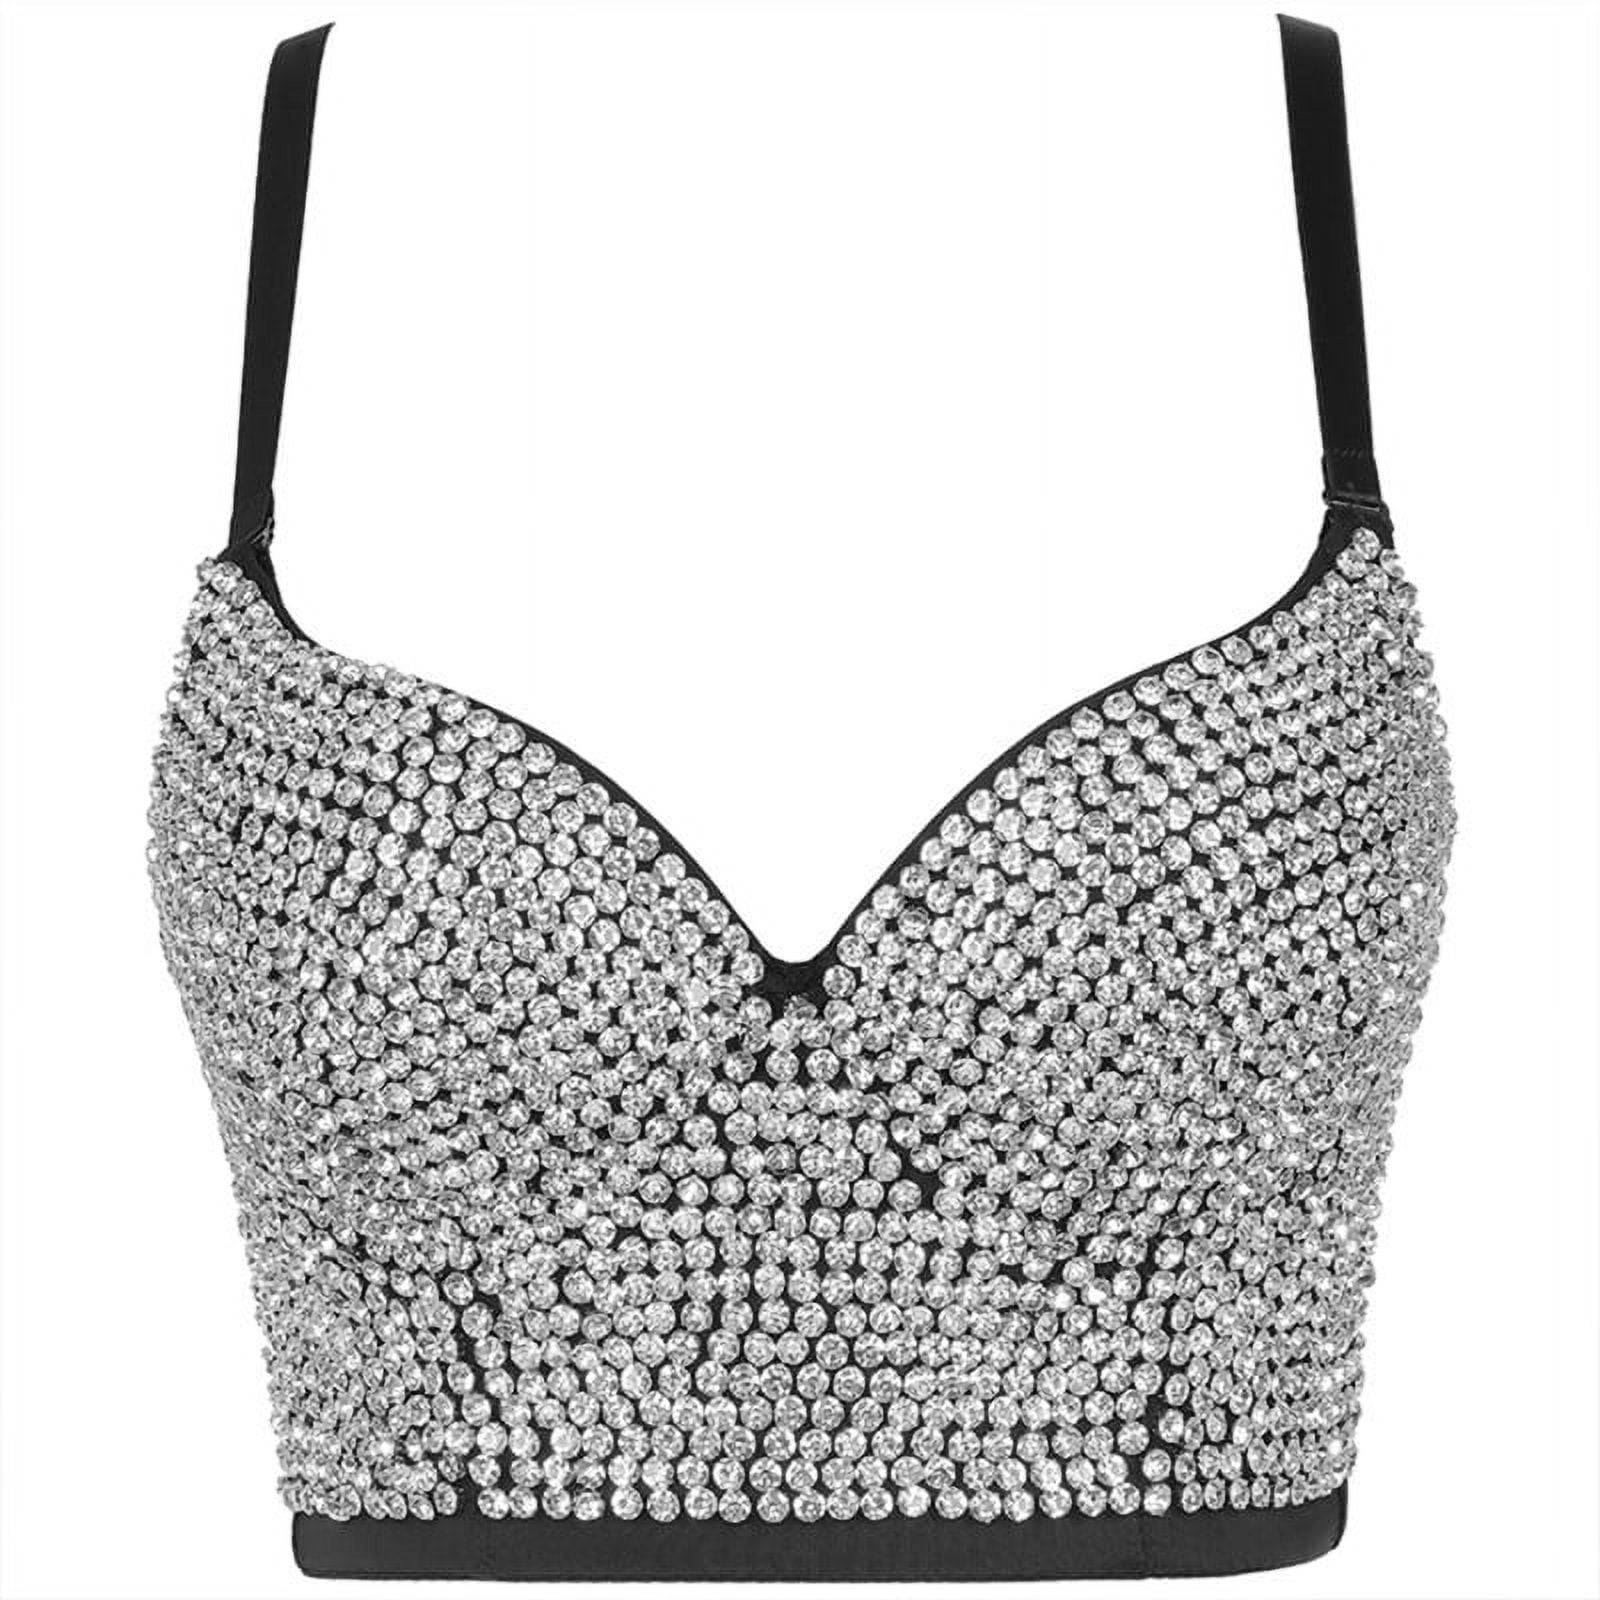  Women's Rhinestone Bralette Push Up Bustier Crop Tops Party  Glitter Gemstone Corset Top Bra for Women and Girls White: Clothing, Shoes  & Jewelry